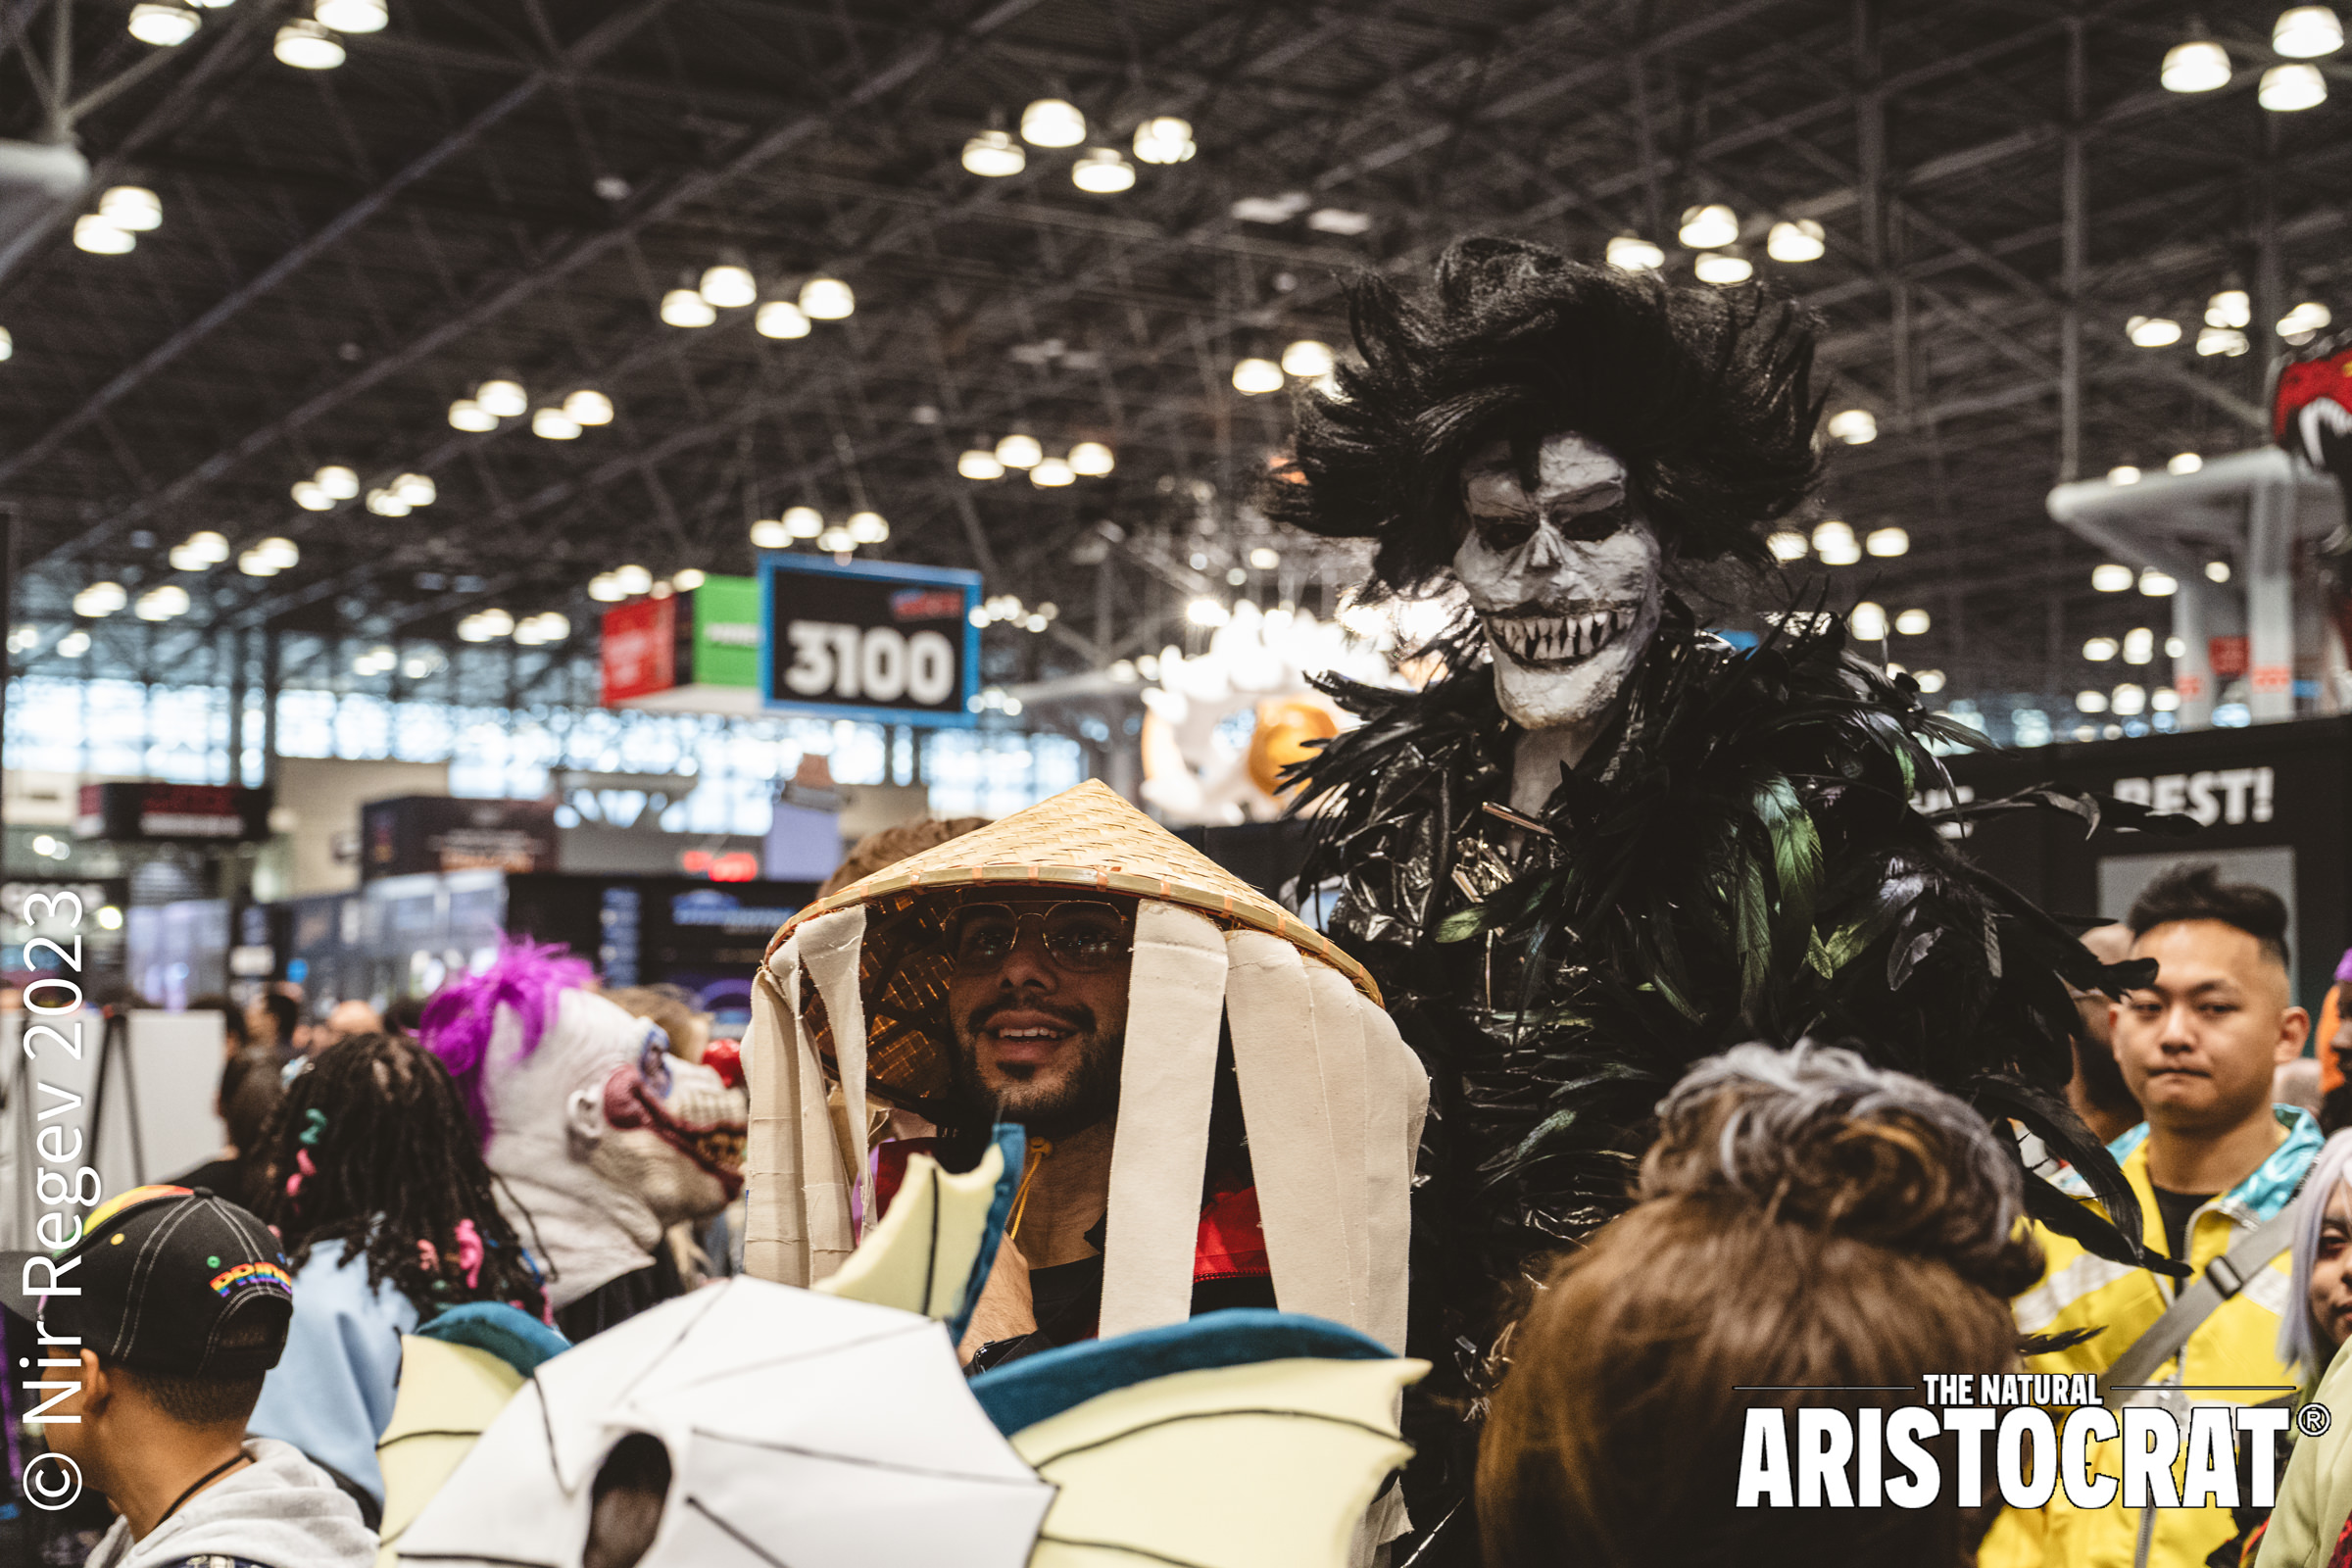 NYCC Death Note cosplayer as Ryuk at New York Comic Con 2023. Photo Credit: © Nir Regev 2023 - The Natural Aristocrat®